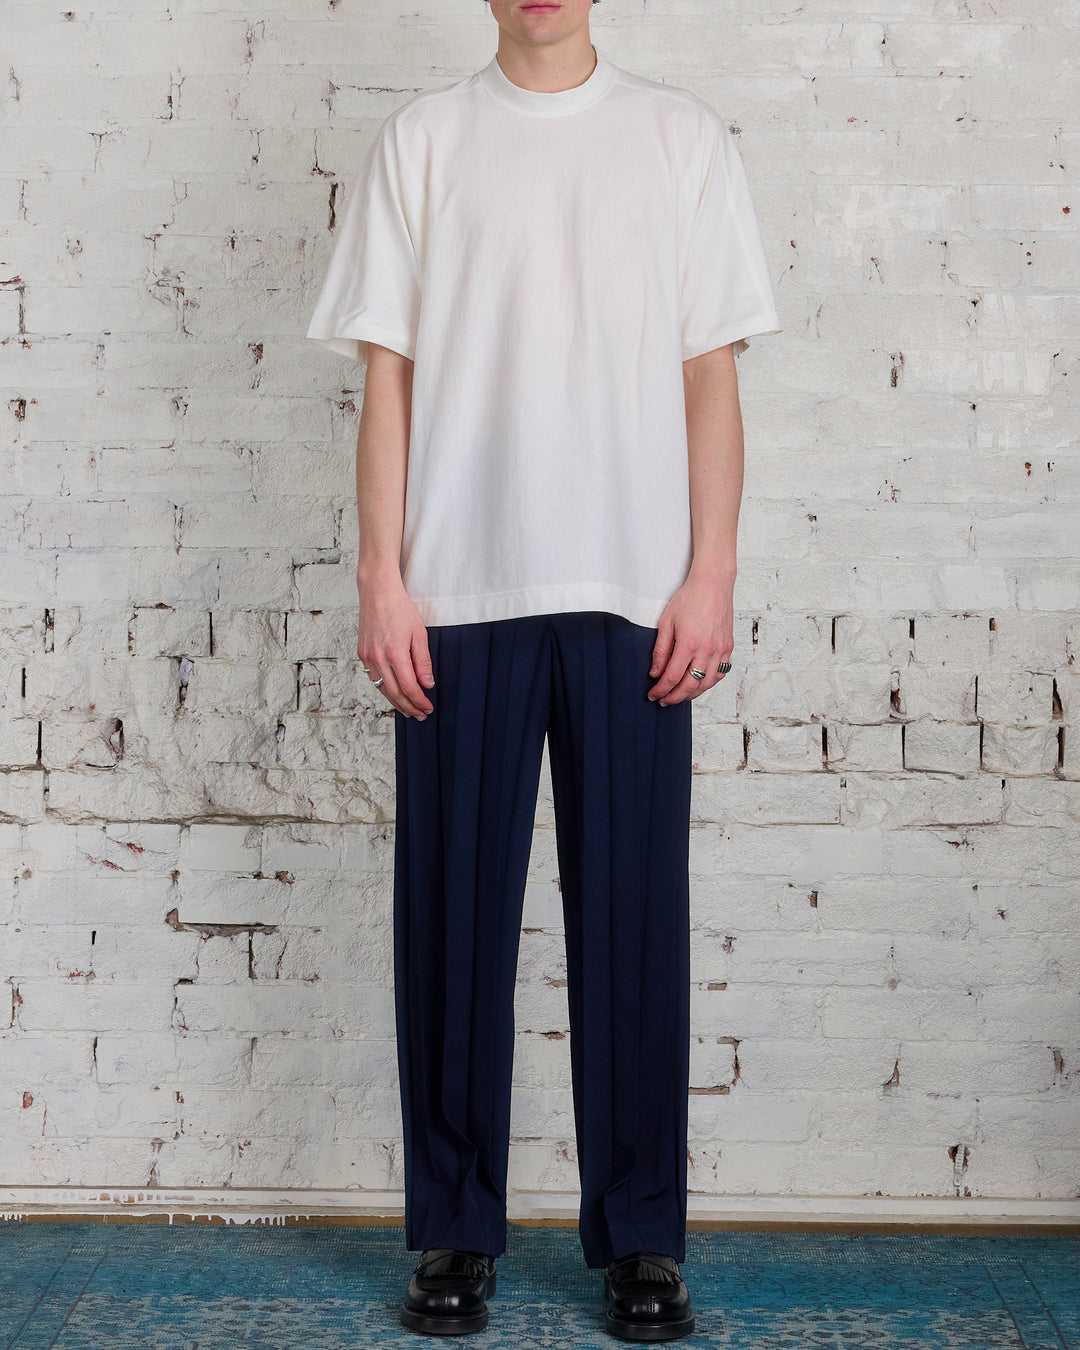 Issey Miyake Homme Plisse March Release T-Shirt 2 White